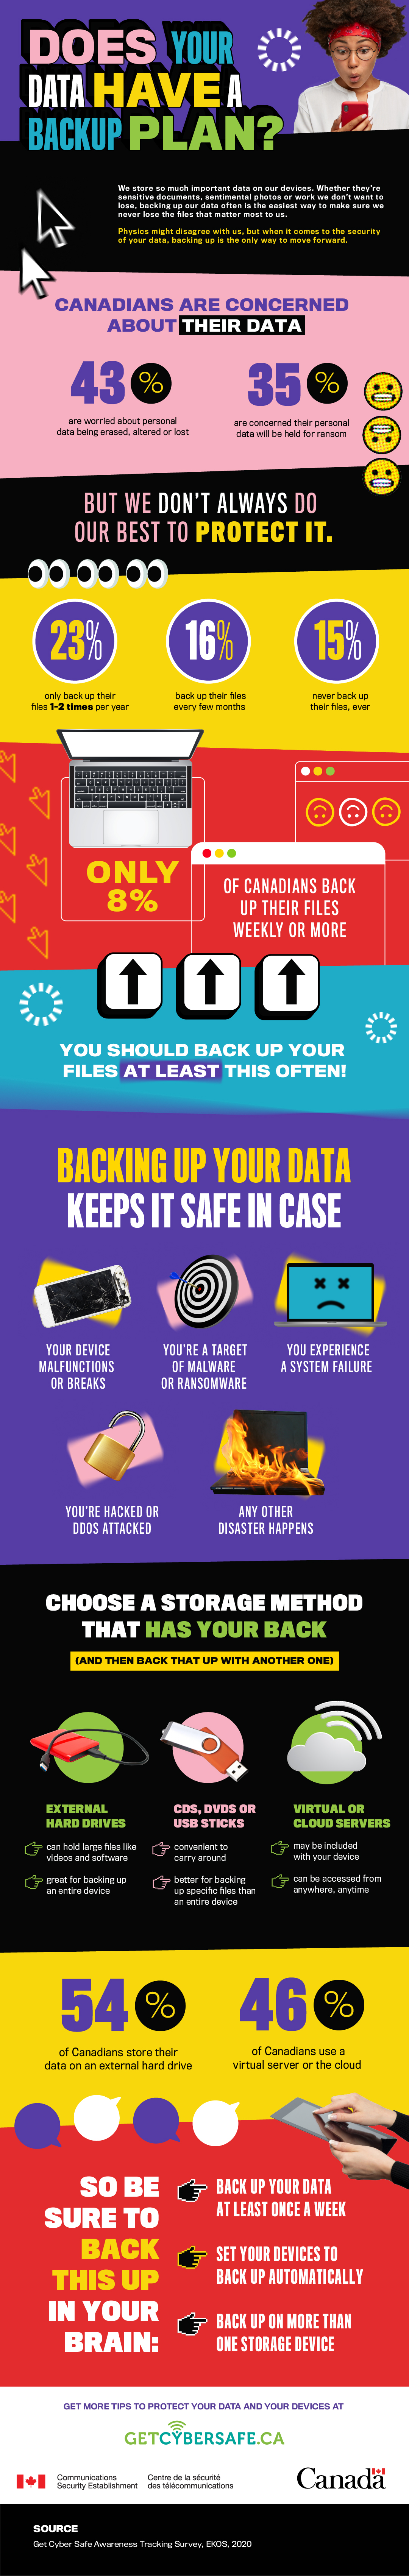 Does your data have a backup plan - Long description immediately follows